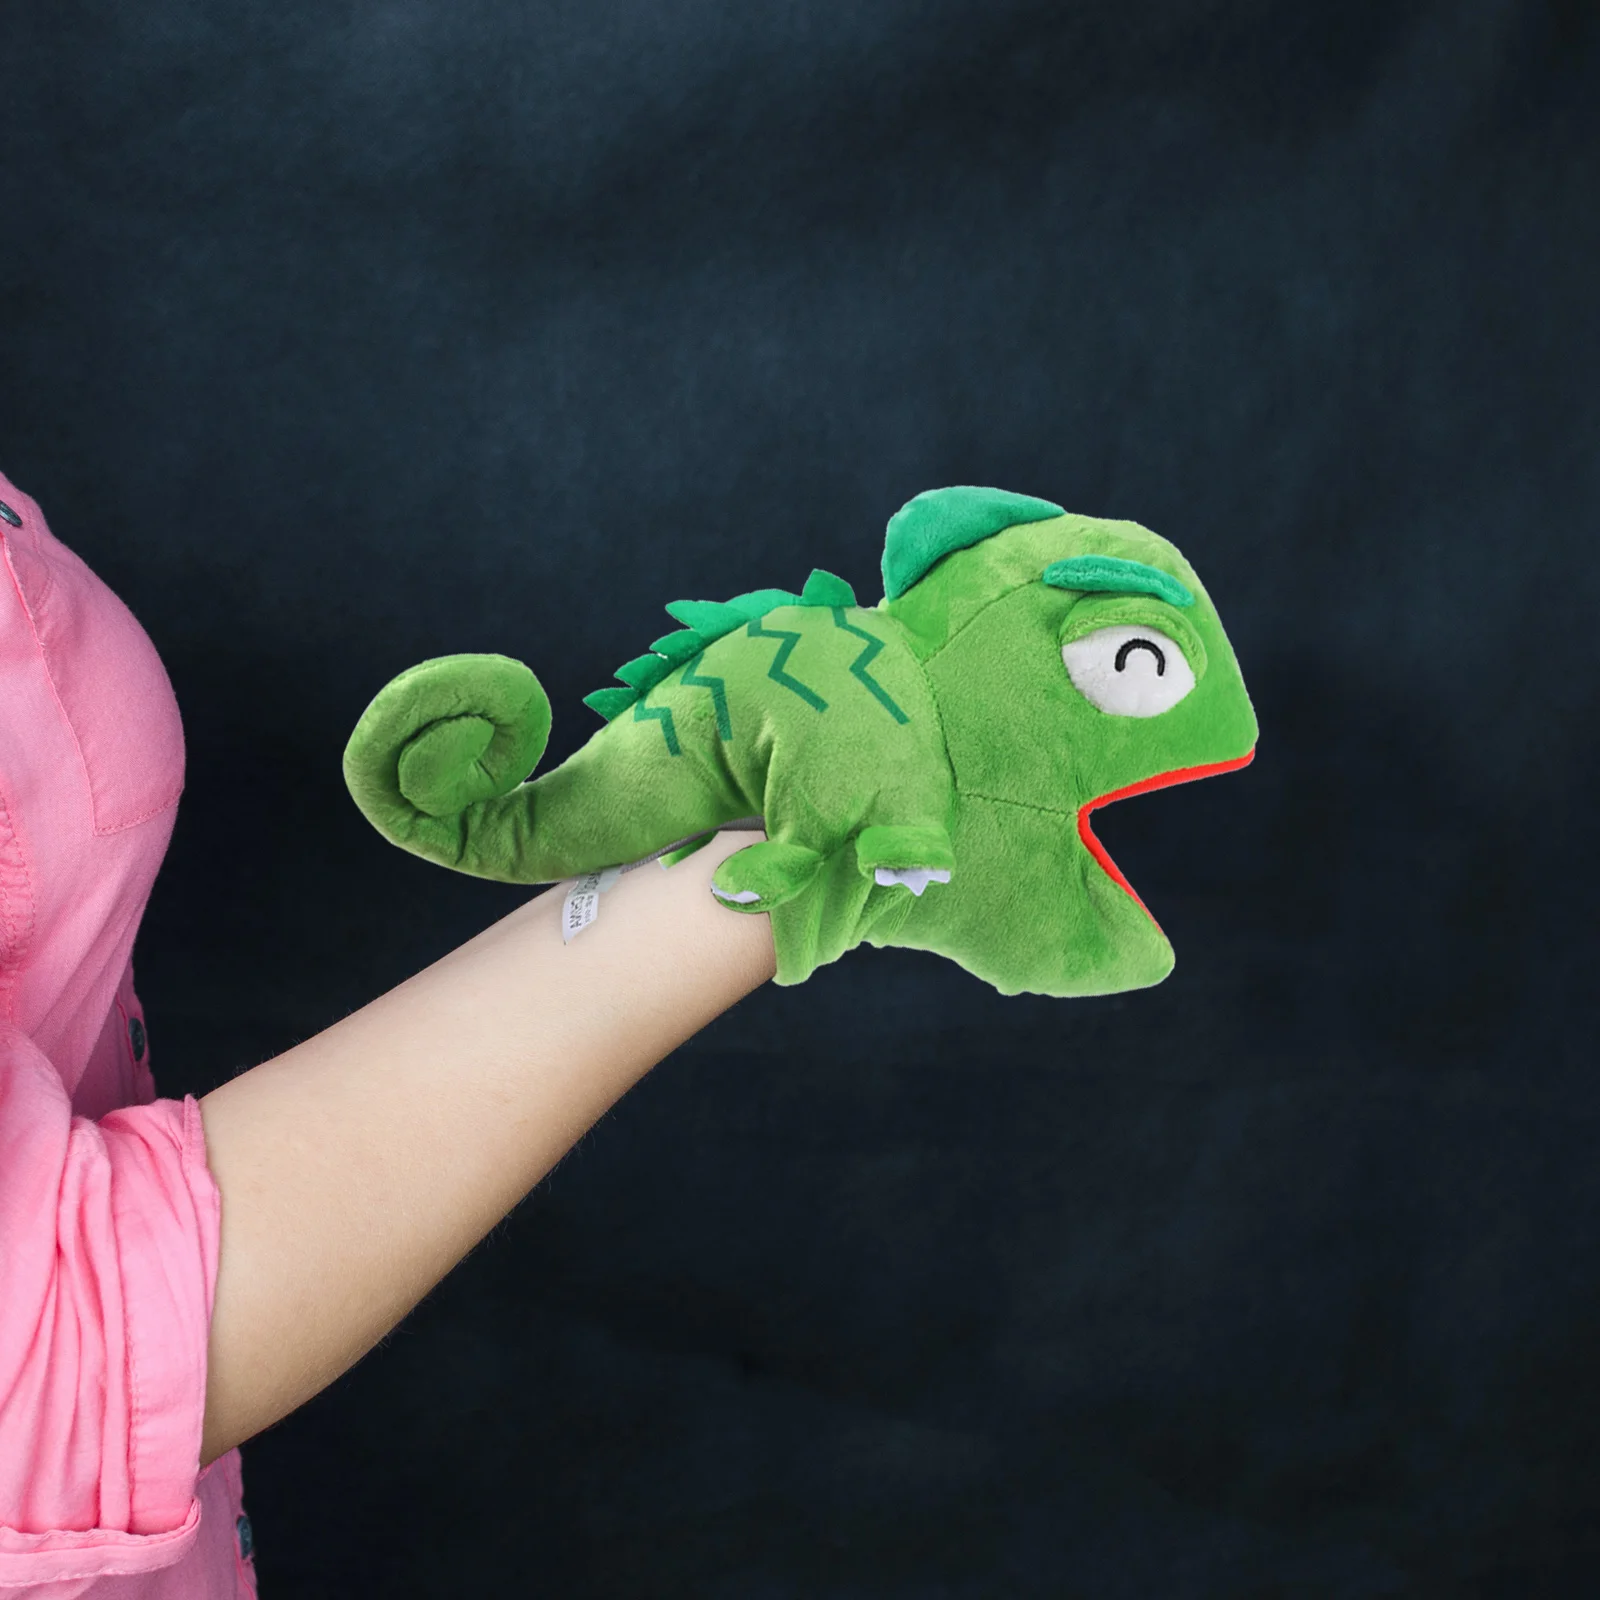 Funny Lizard Hand Puppet Plush Reptile Animal Hand Puppet Toy Toddler Kids Gift cartoon animal hand puppet plush shark hand puppet stuffed animal toy interactive toy